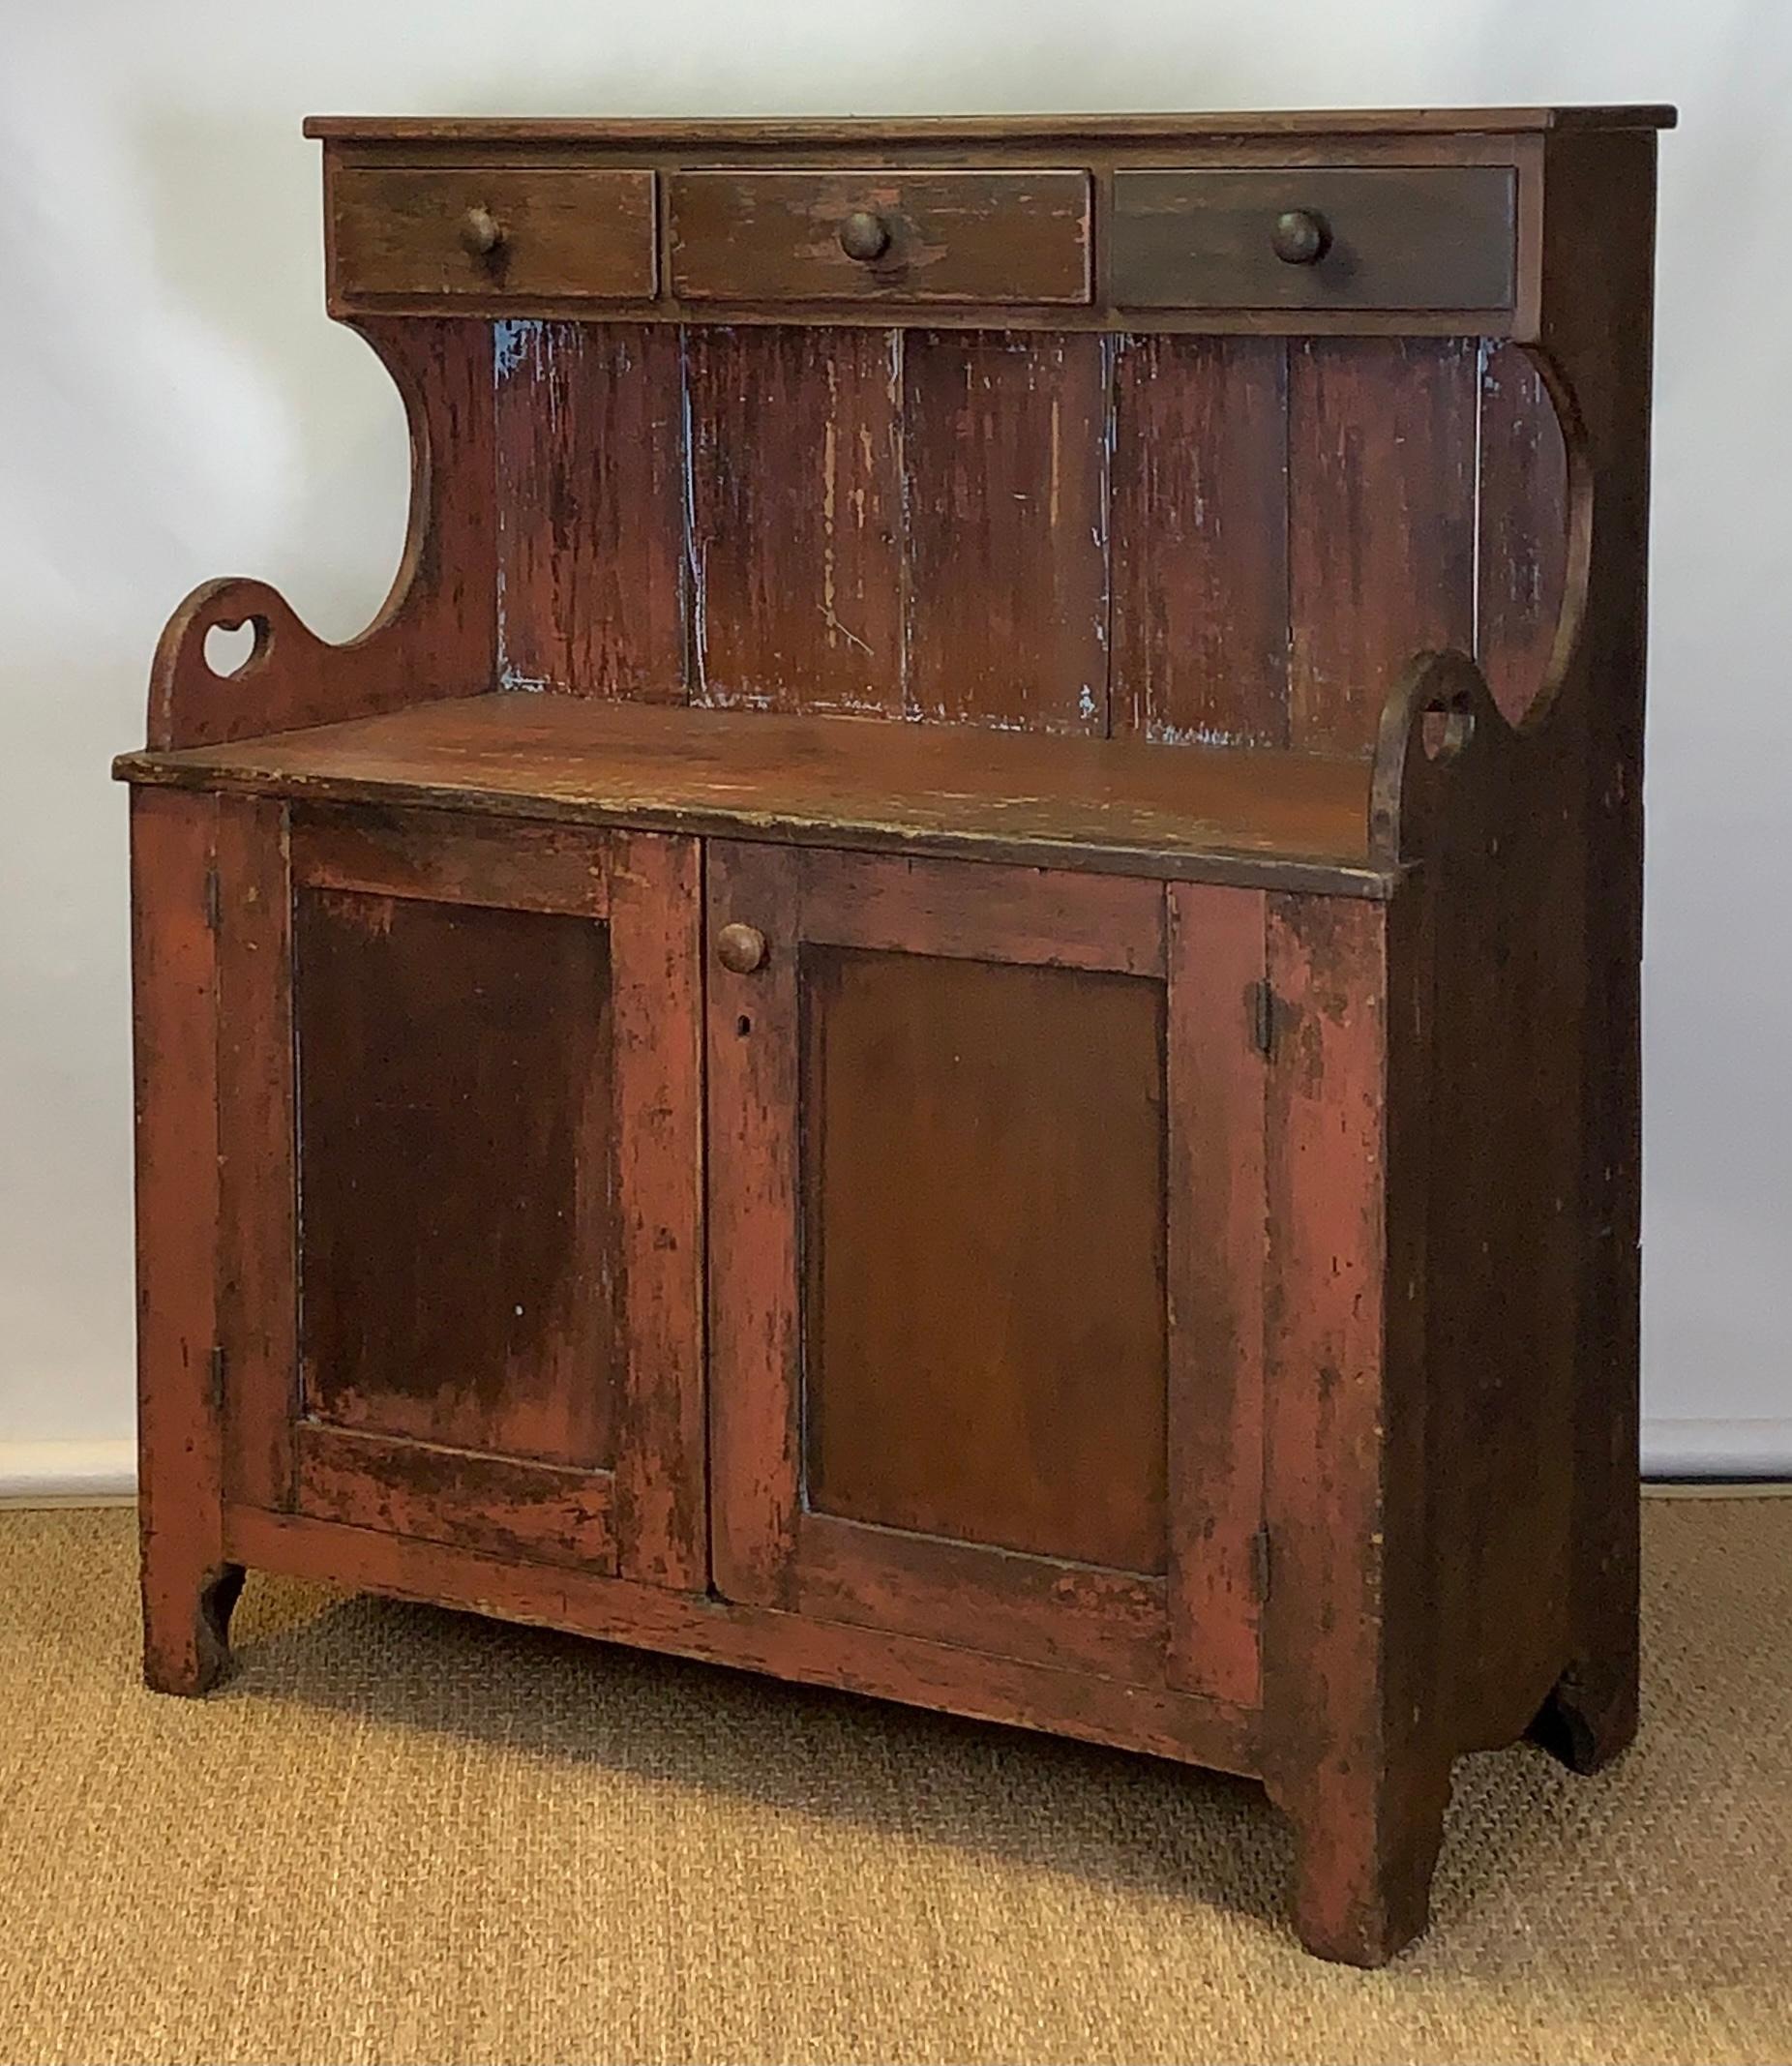 A very charming mid-19th century. American paint decorated dry sink or cabinet retaining traces of original paint likely from the Mid-Atlantic region.